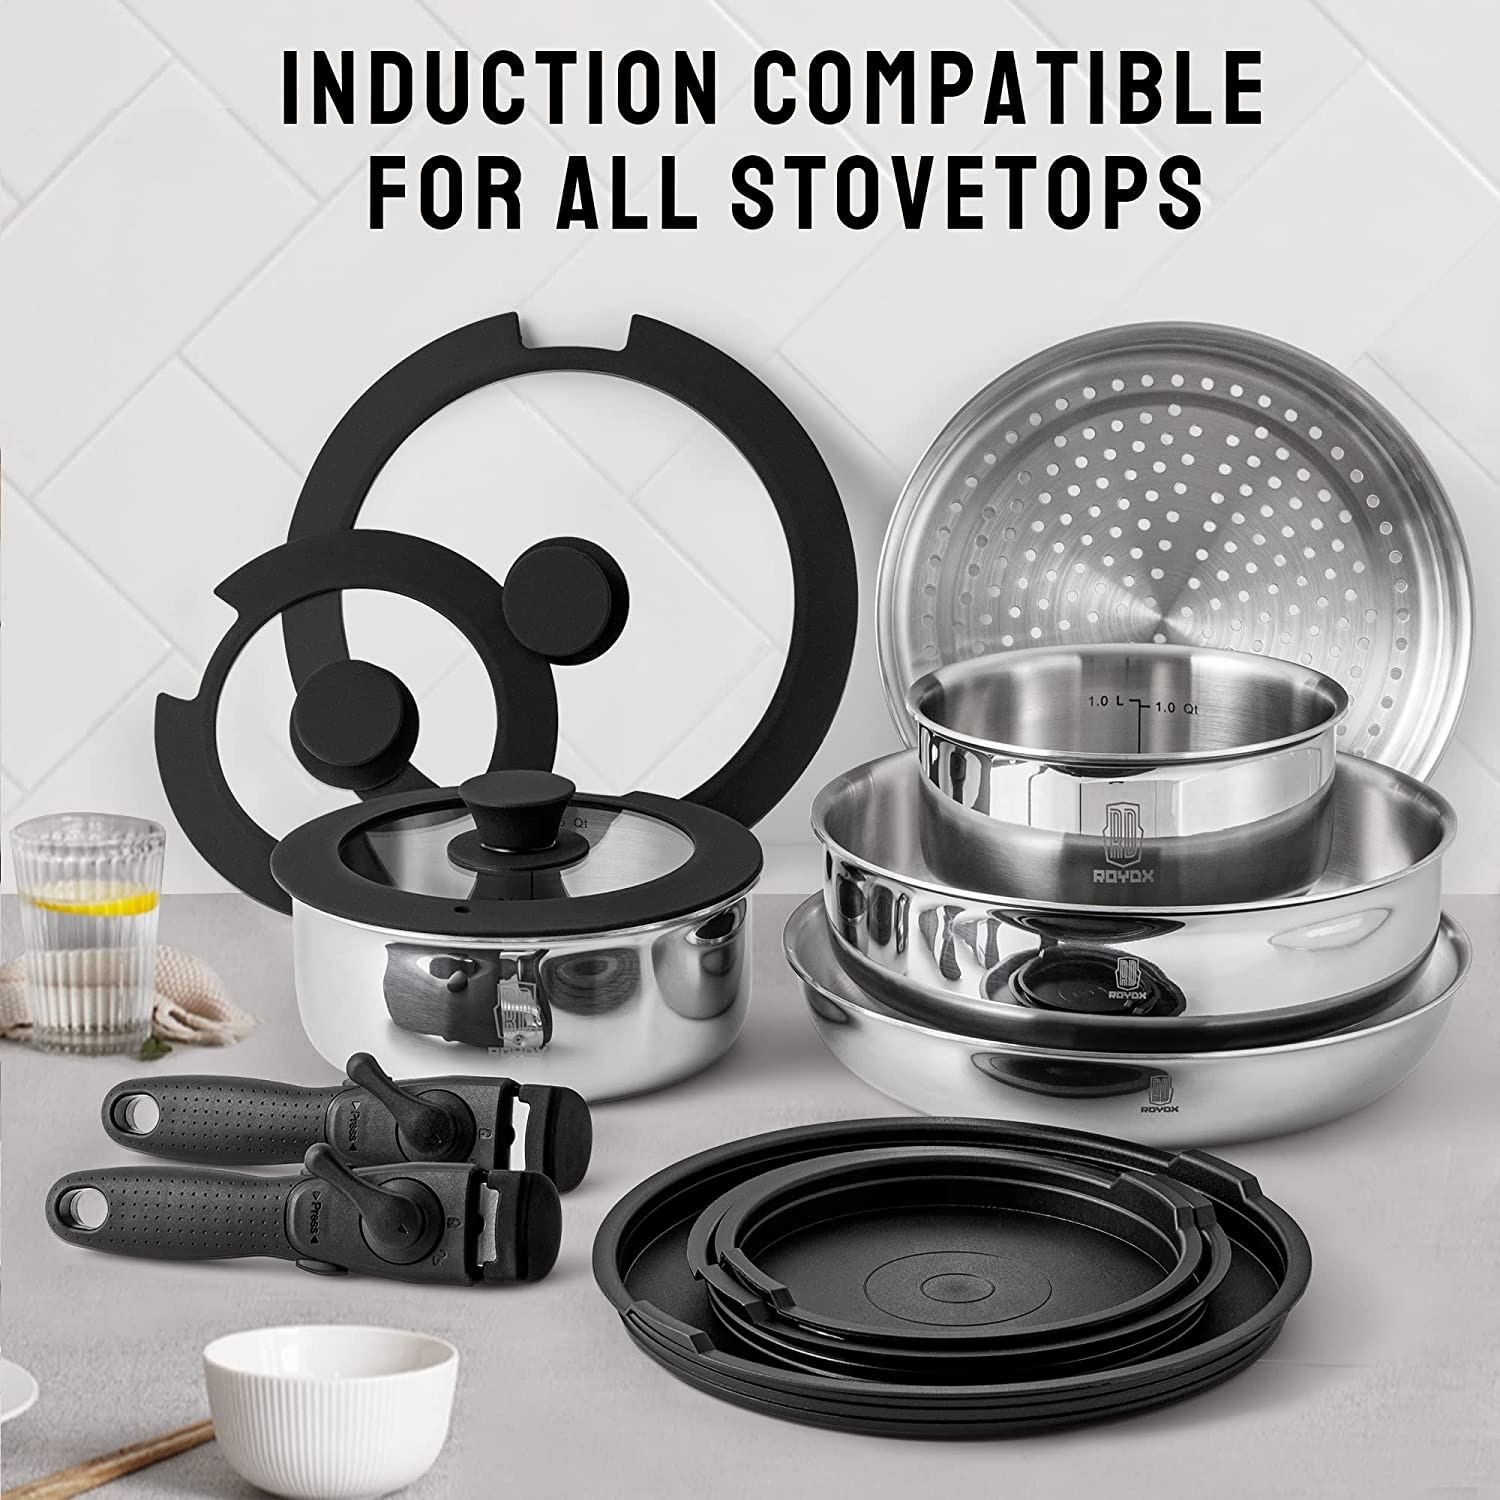 https://ak1.ostkcdn.com/images/products/is/images/direct/96062b0fd28adc02862cc140e9706b3bfb3e43d6/16-Piece-Stainless-Steel-Cookware-Set%2C-Kitchen-Removable-Handle-Stackable-Pots-and-Pans-Set%2C-Frying-Pans-Saucepans-with-Lid.jpg